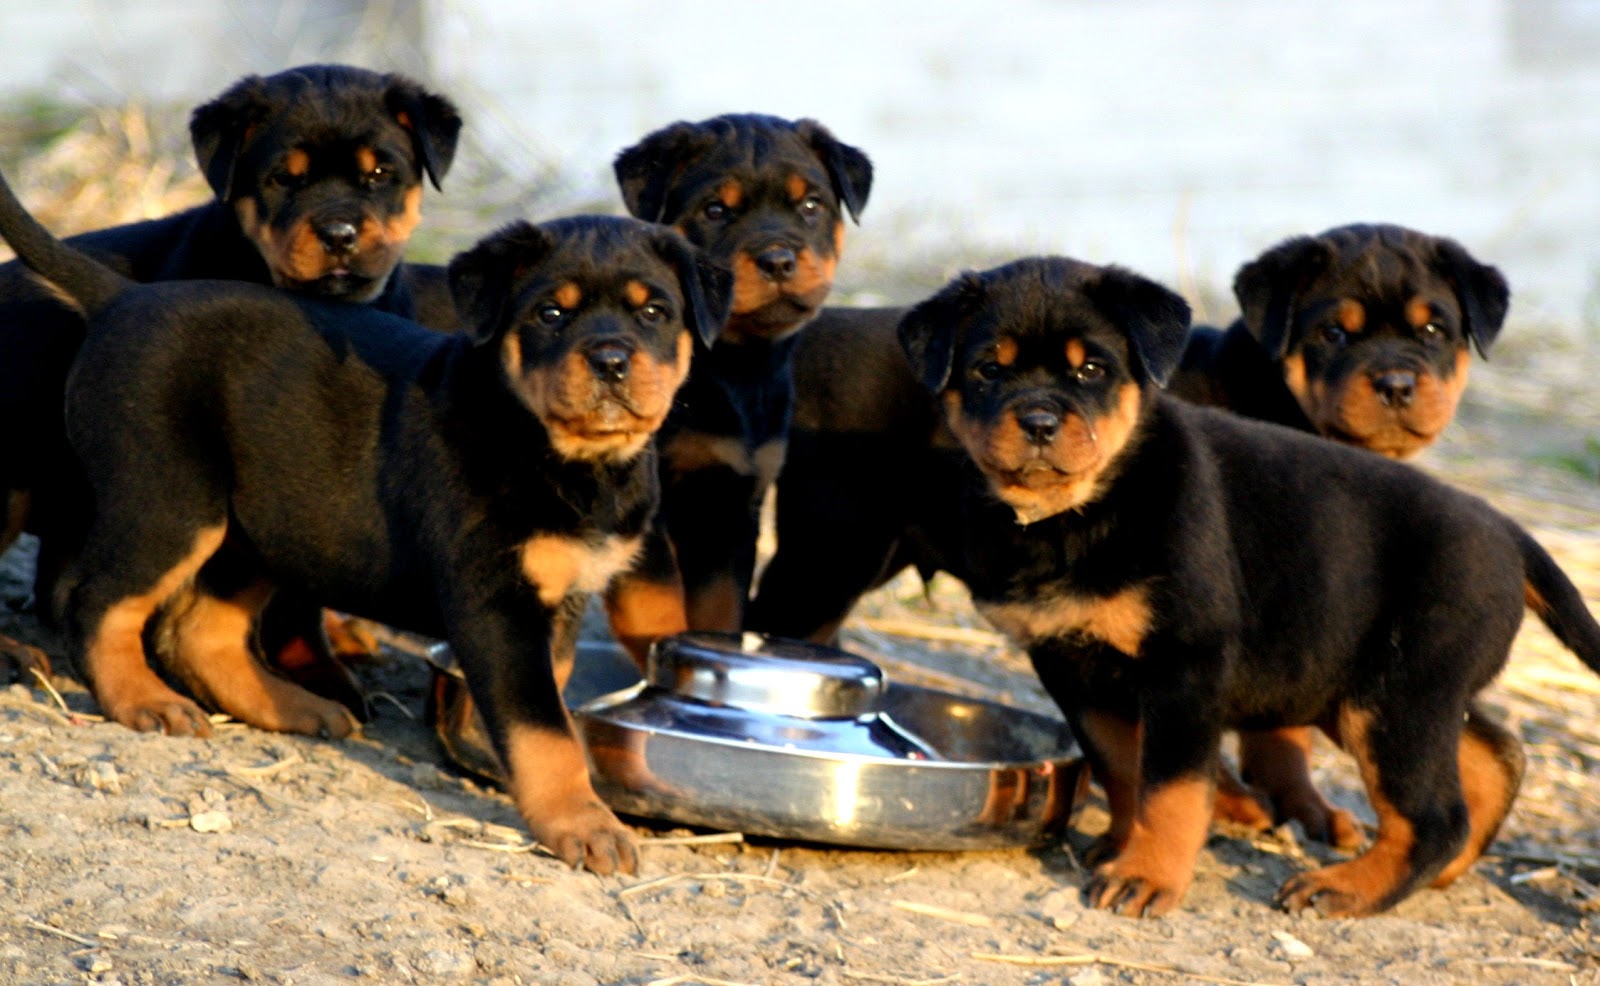 puppy face photo funny rottweilers puppy photo rottweilersdog face ...